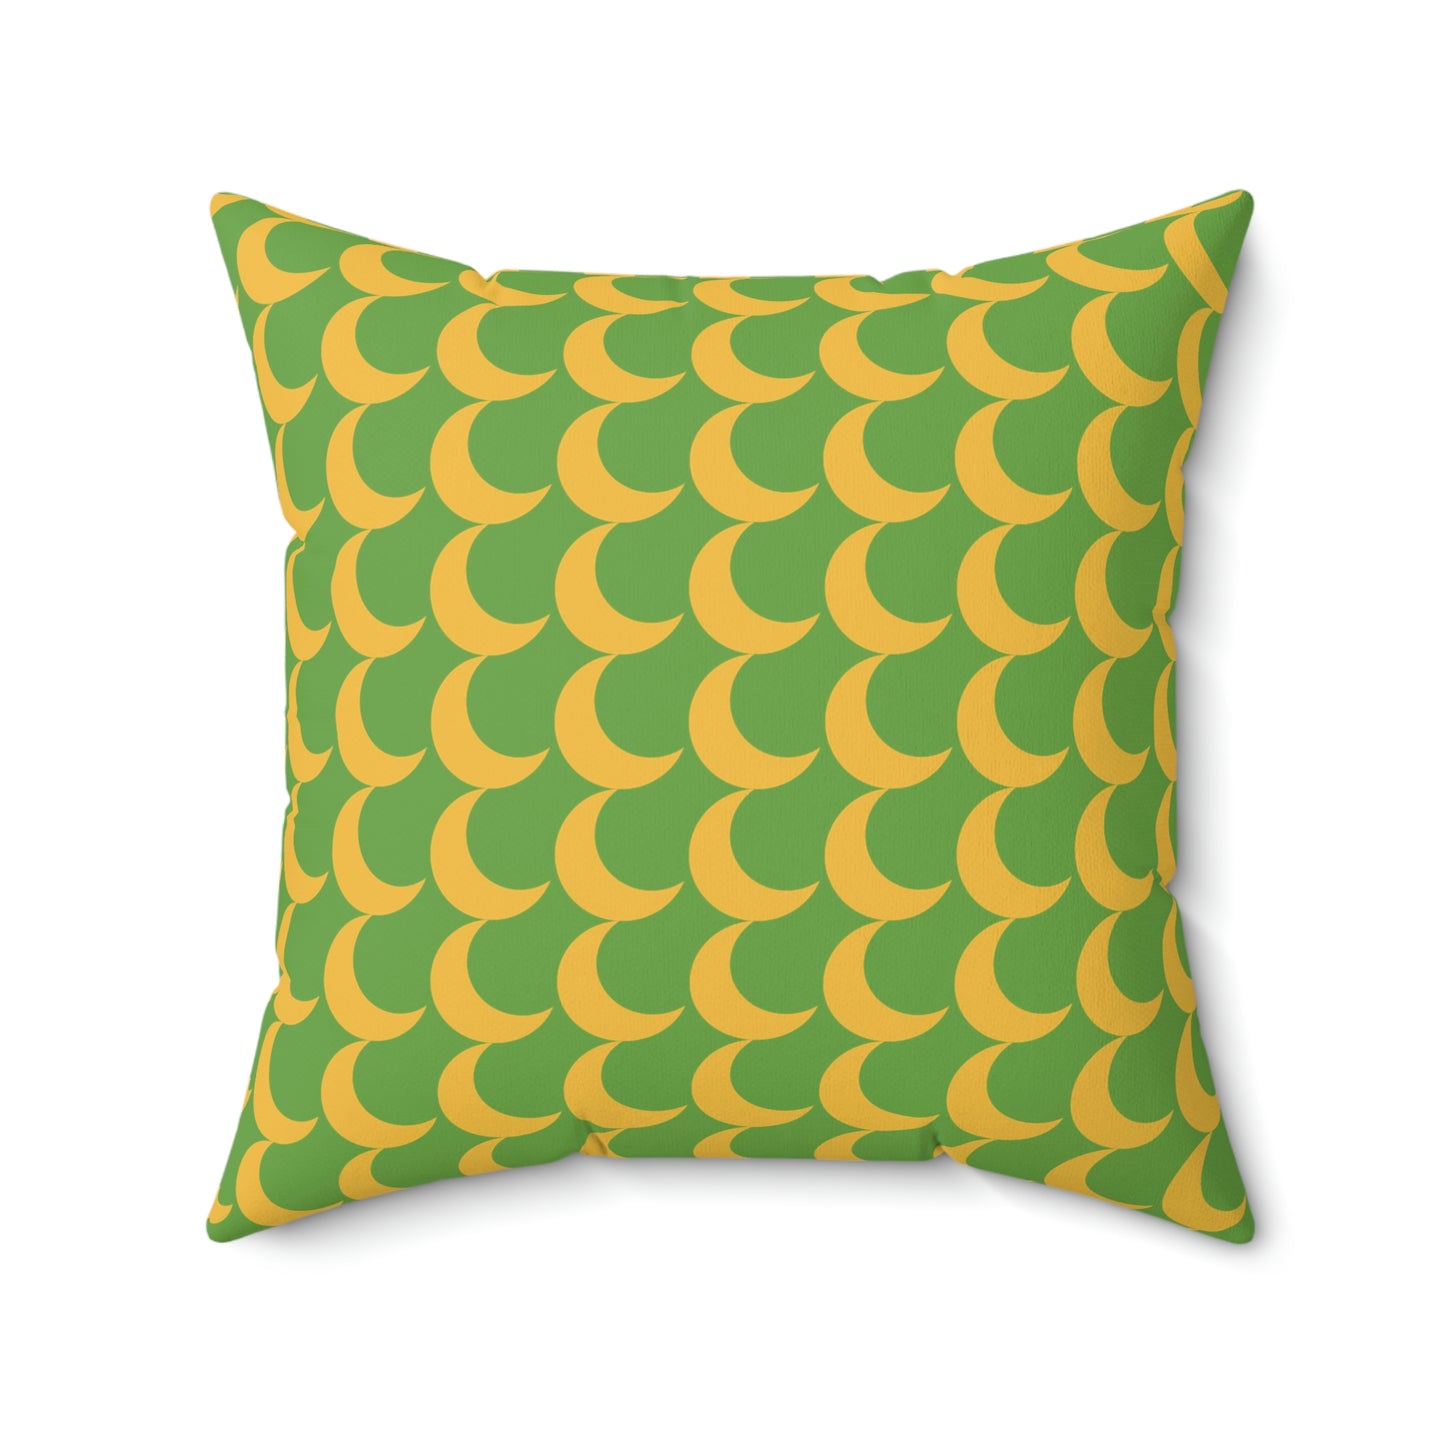 Spun Polyester Square Pillow Case “Crescent Moon on Green”